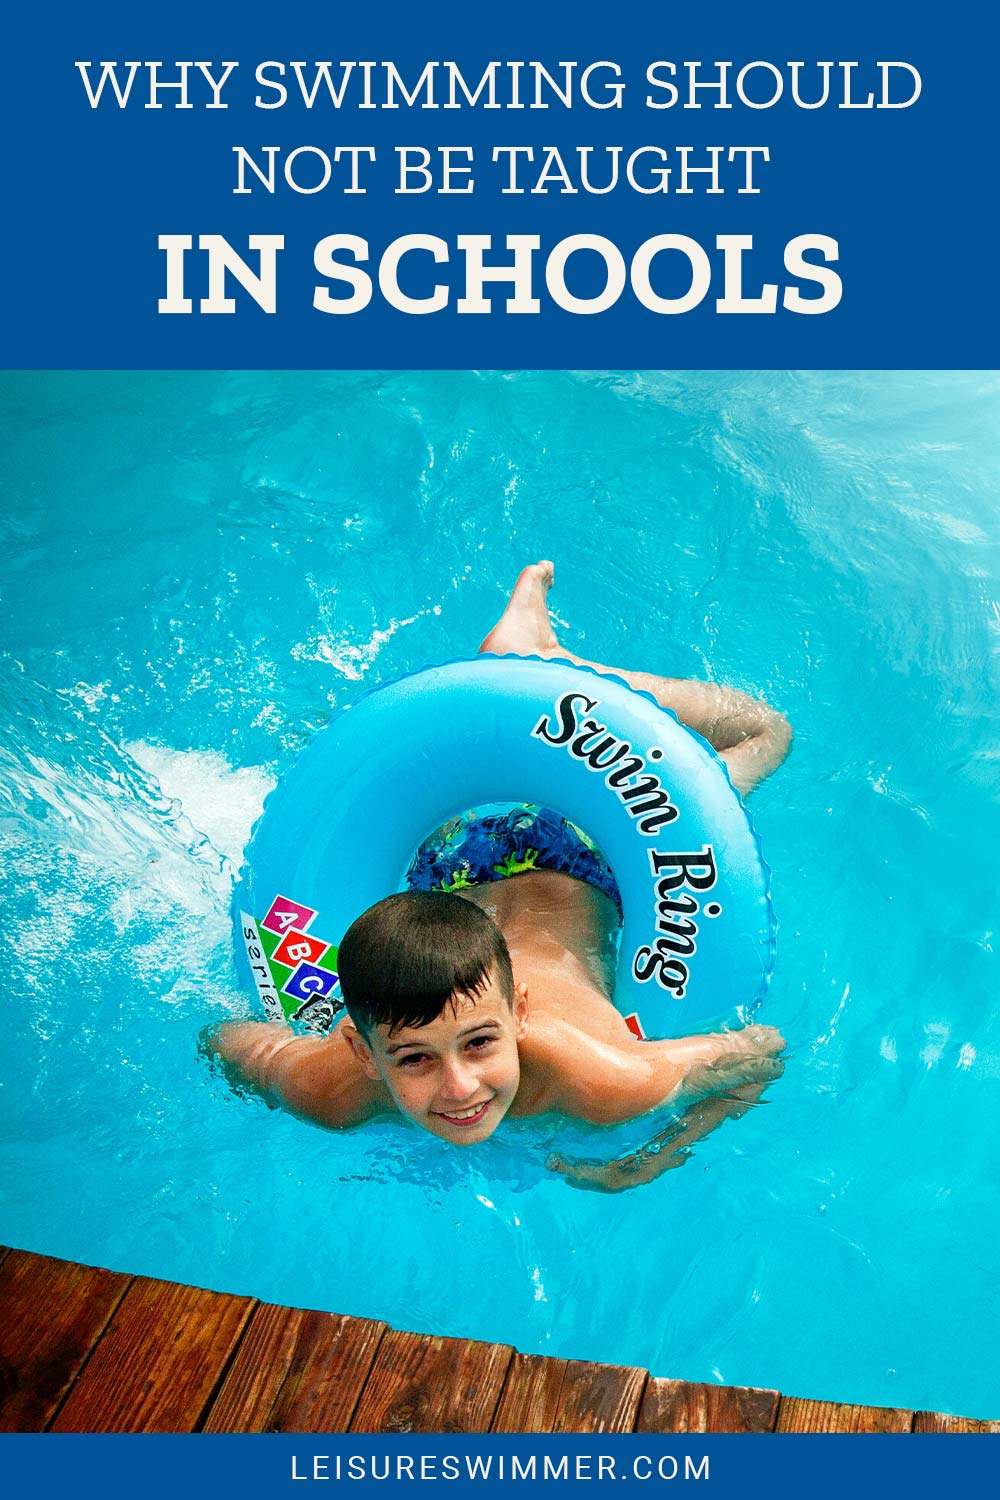 Boy in swimming ring smiling - Why Swimming Should Not Be Taught In Schools